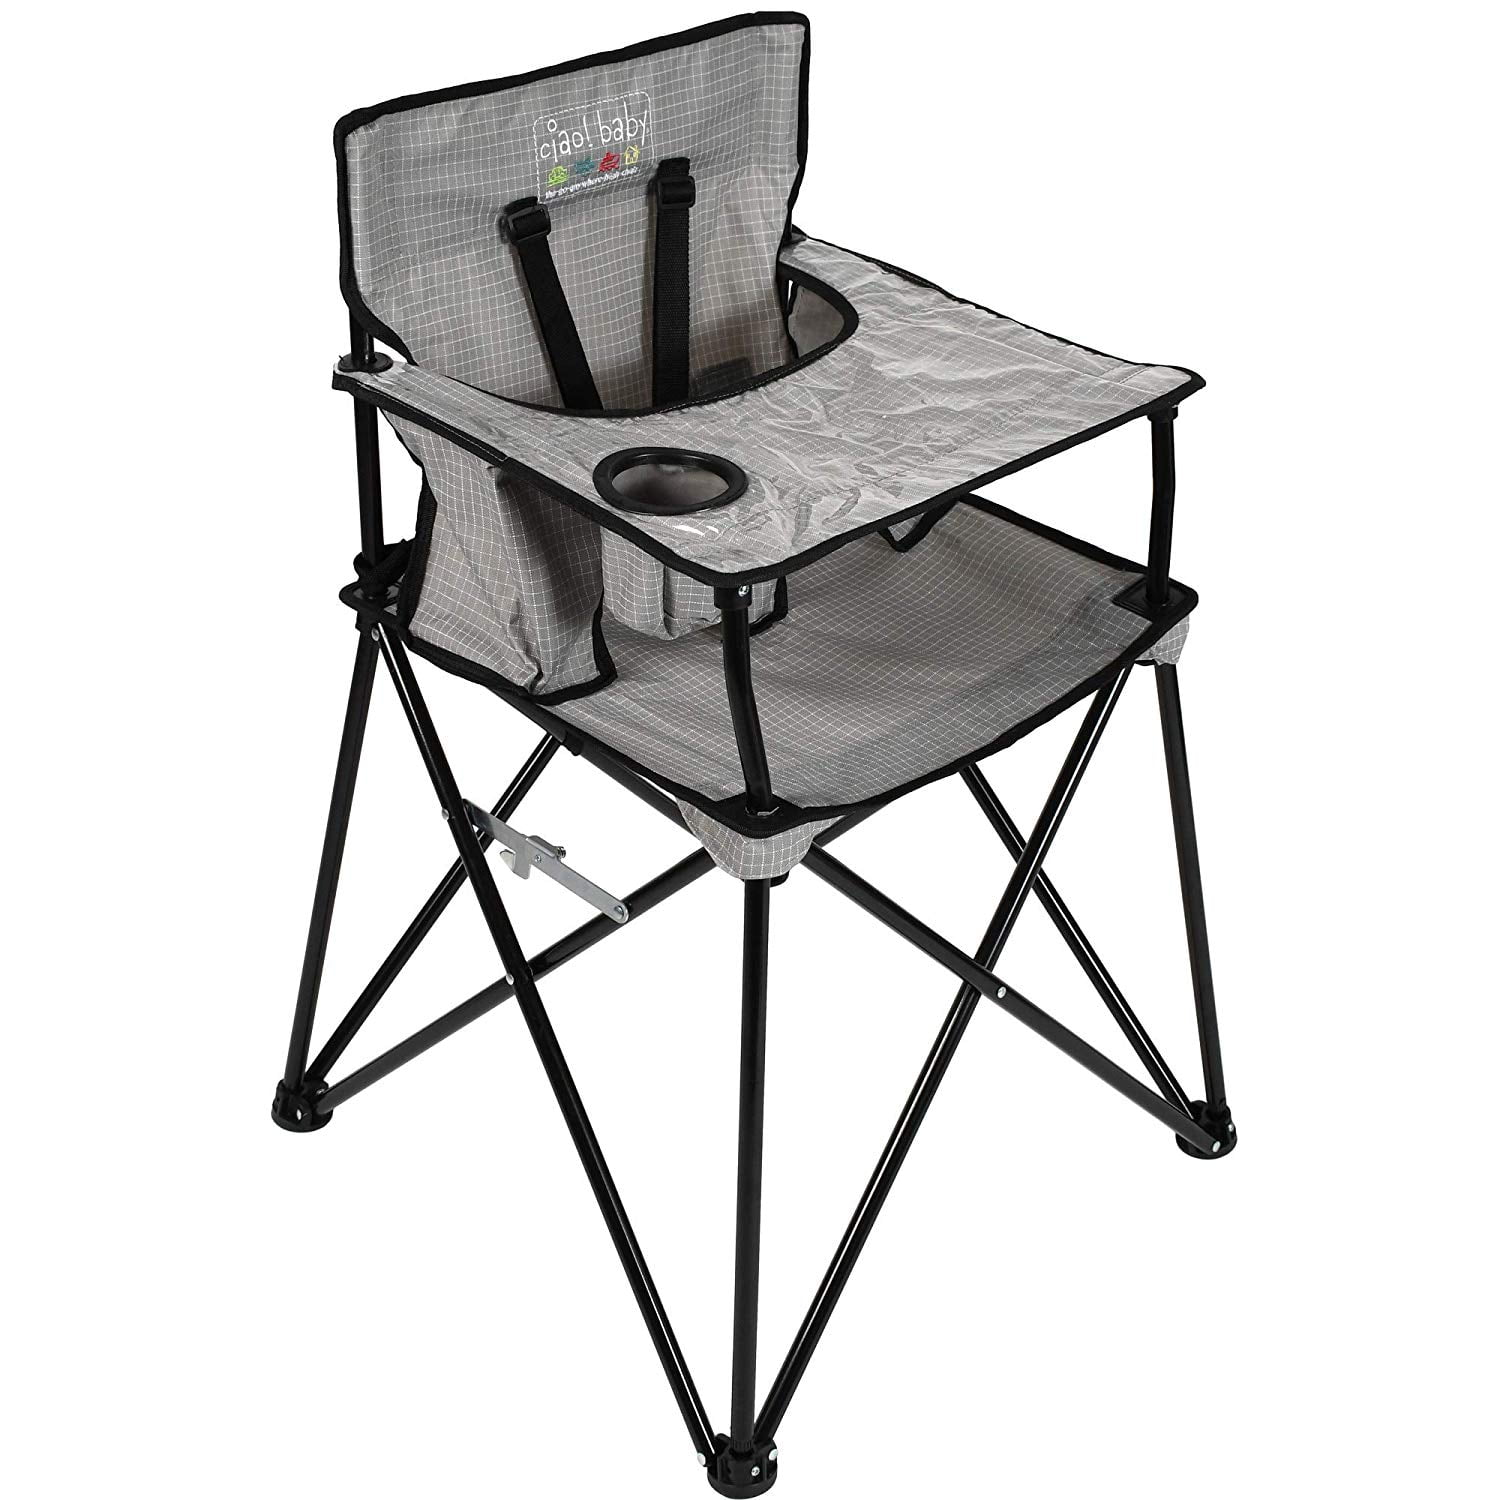 Ciao! Baby Camping Chair, Gray